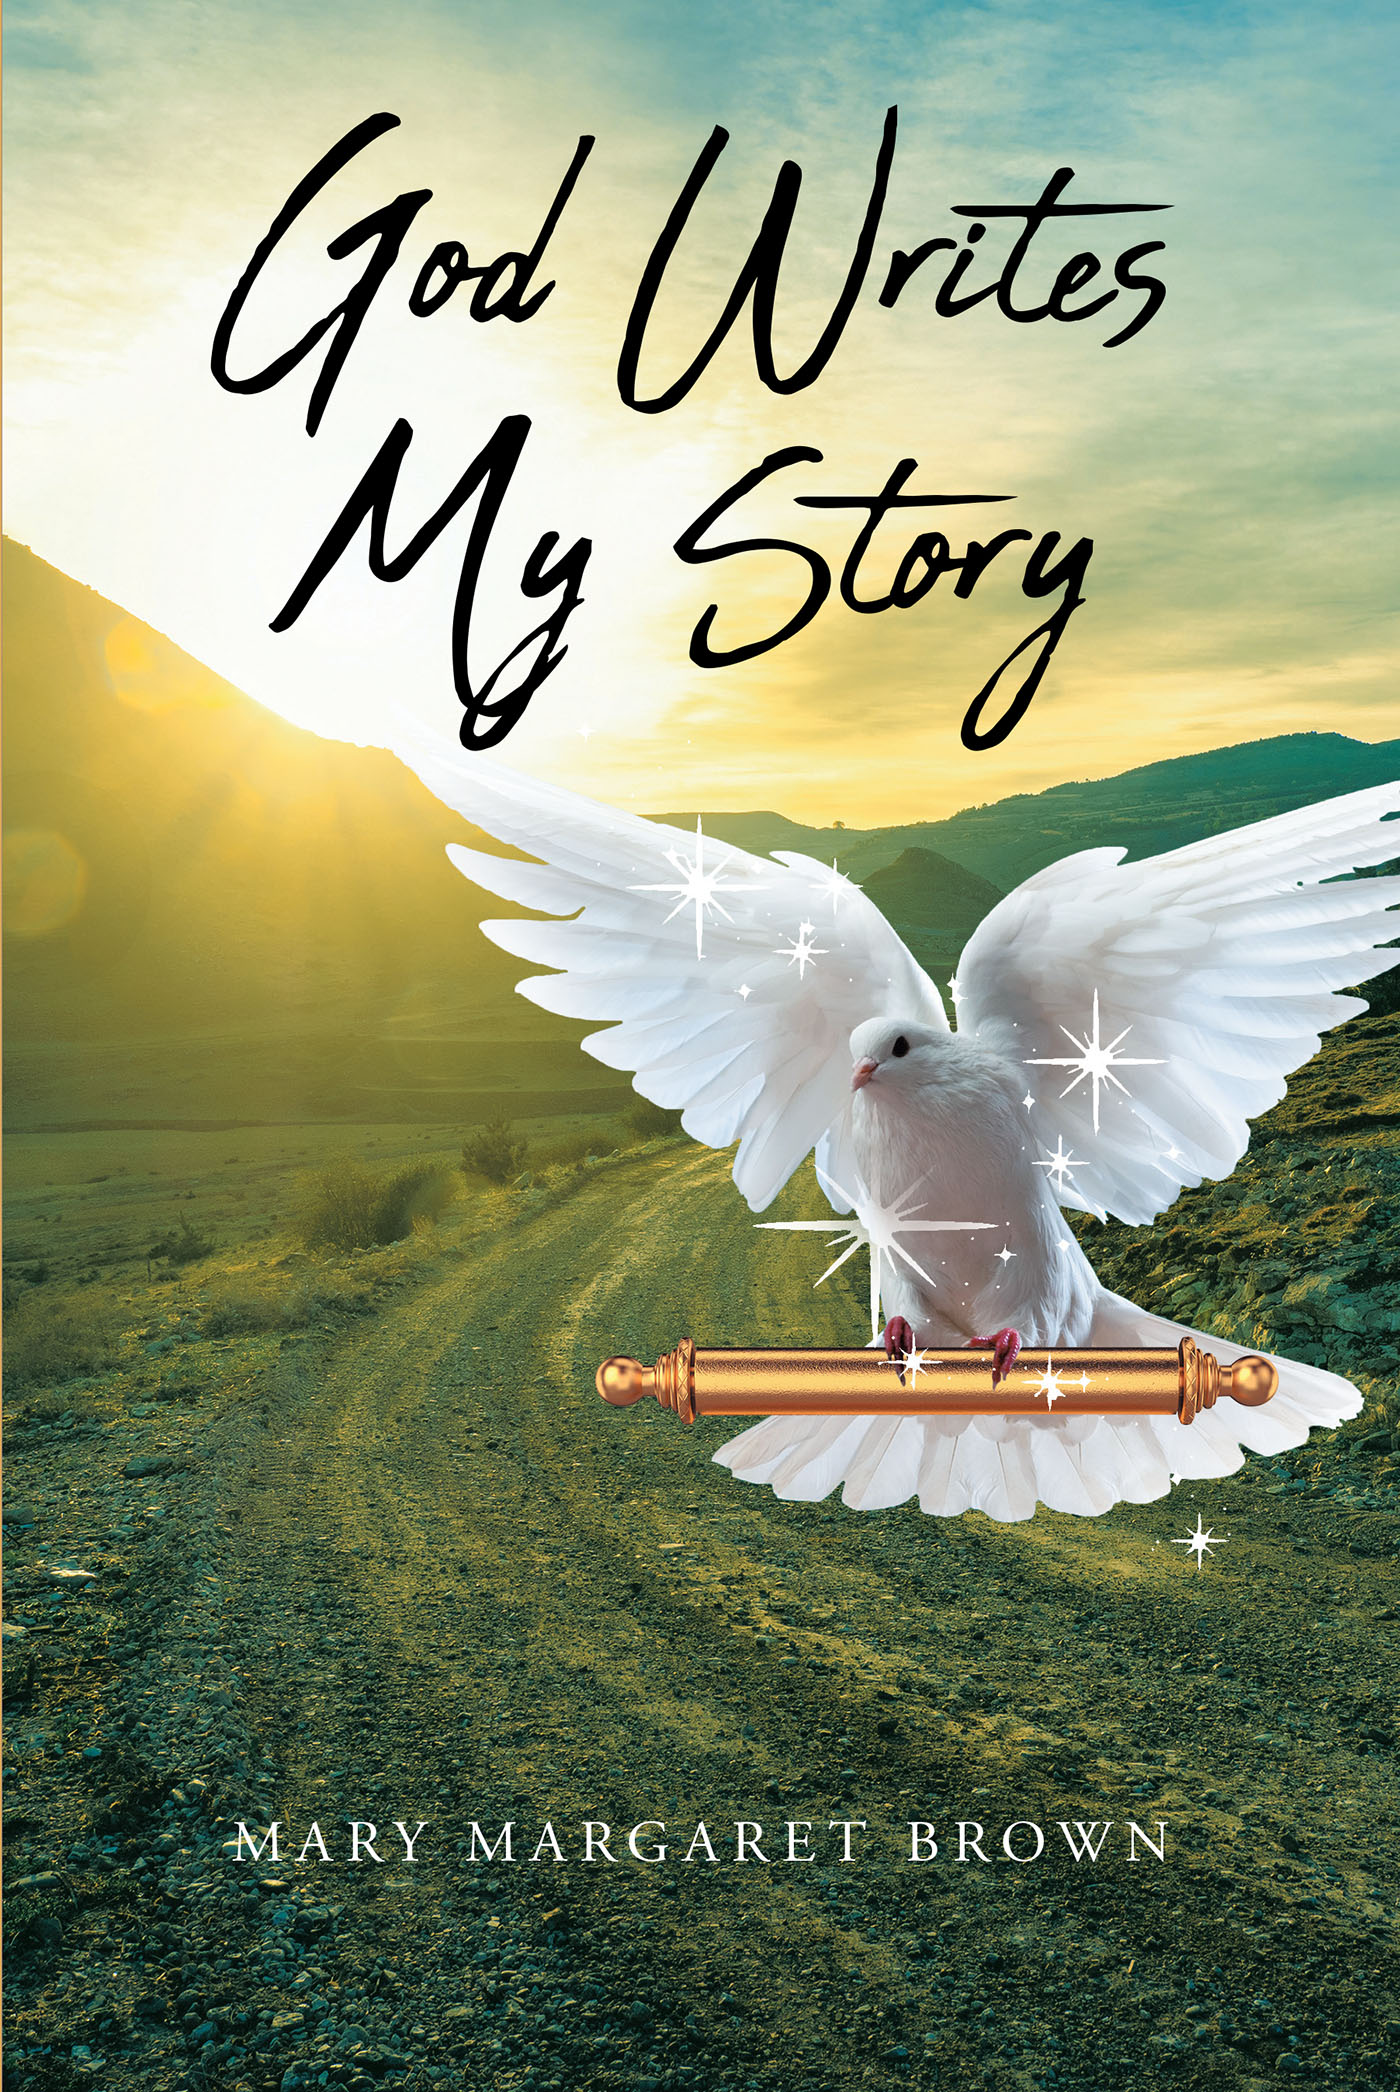 Mary Margaret Brown’s Newly Released "God Writes My Story" is a Potent Spiritual Memoir That Explores That Author’s Most Impactful Experiences